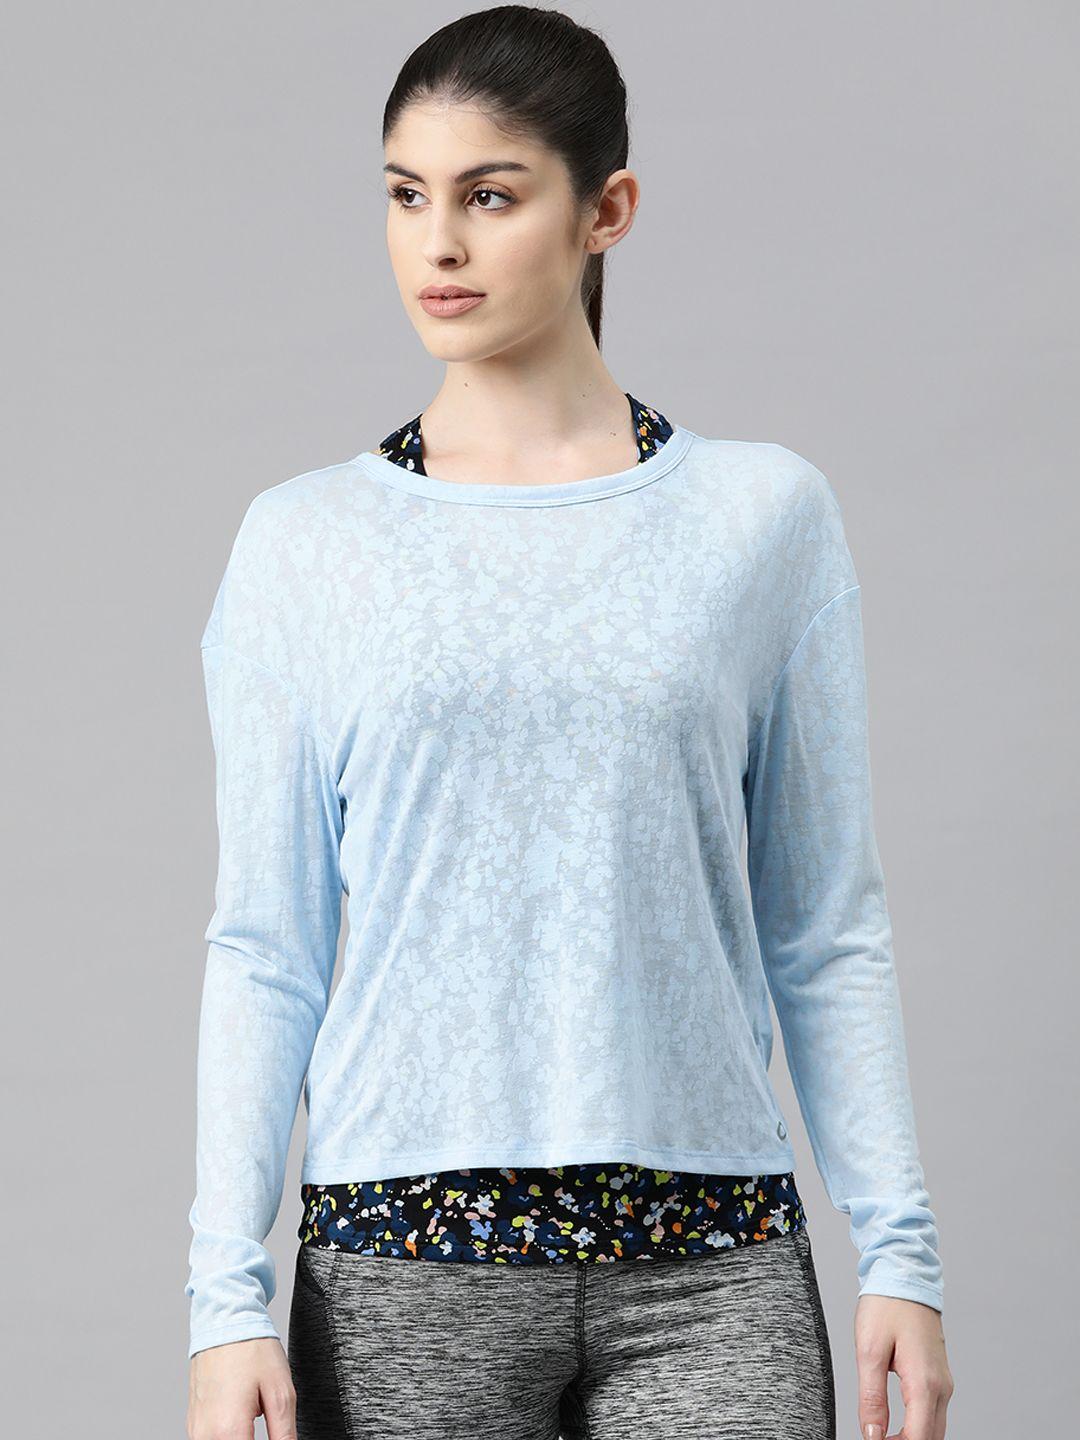 marks & spencer abstract printed top with camisole